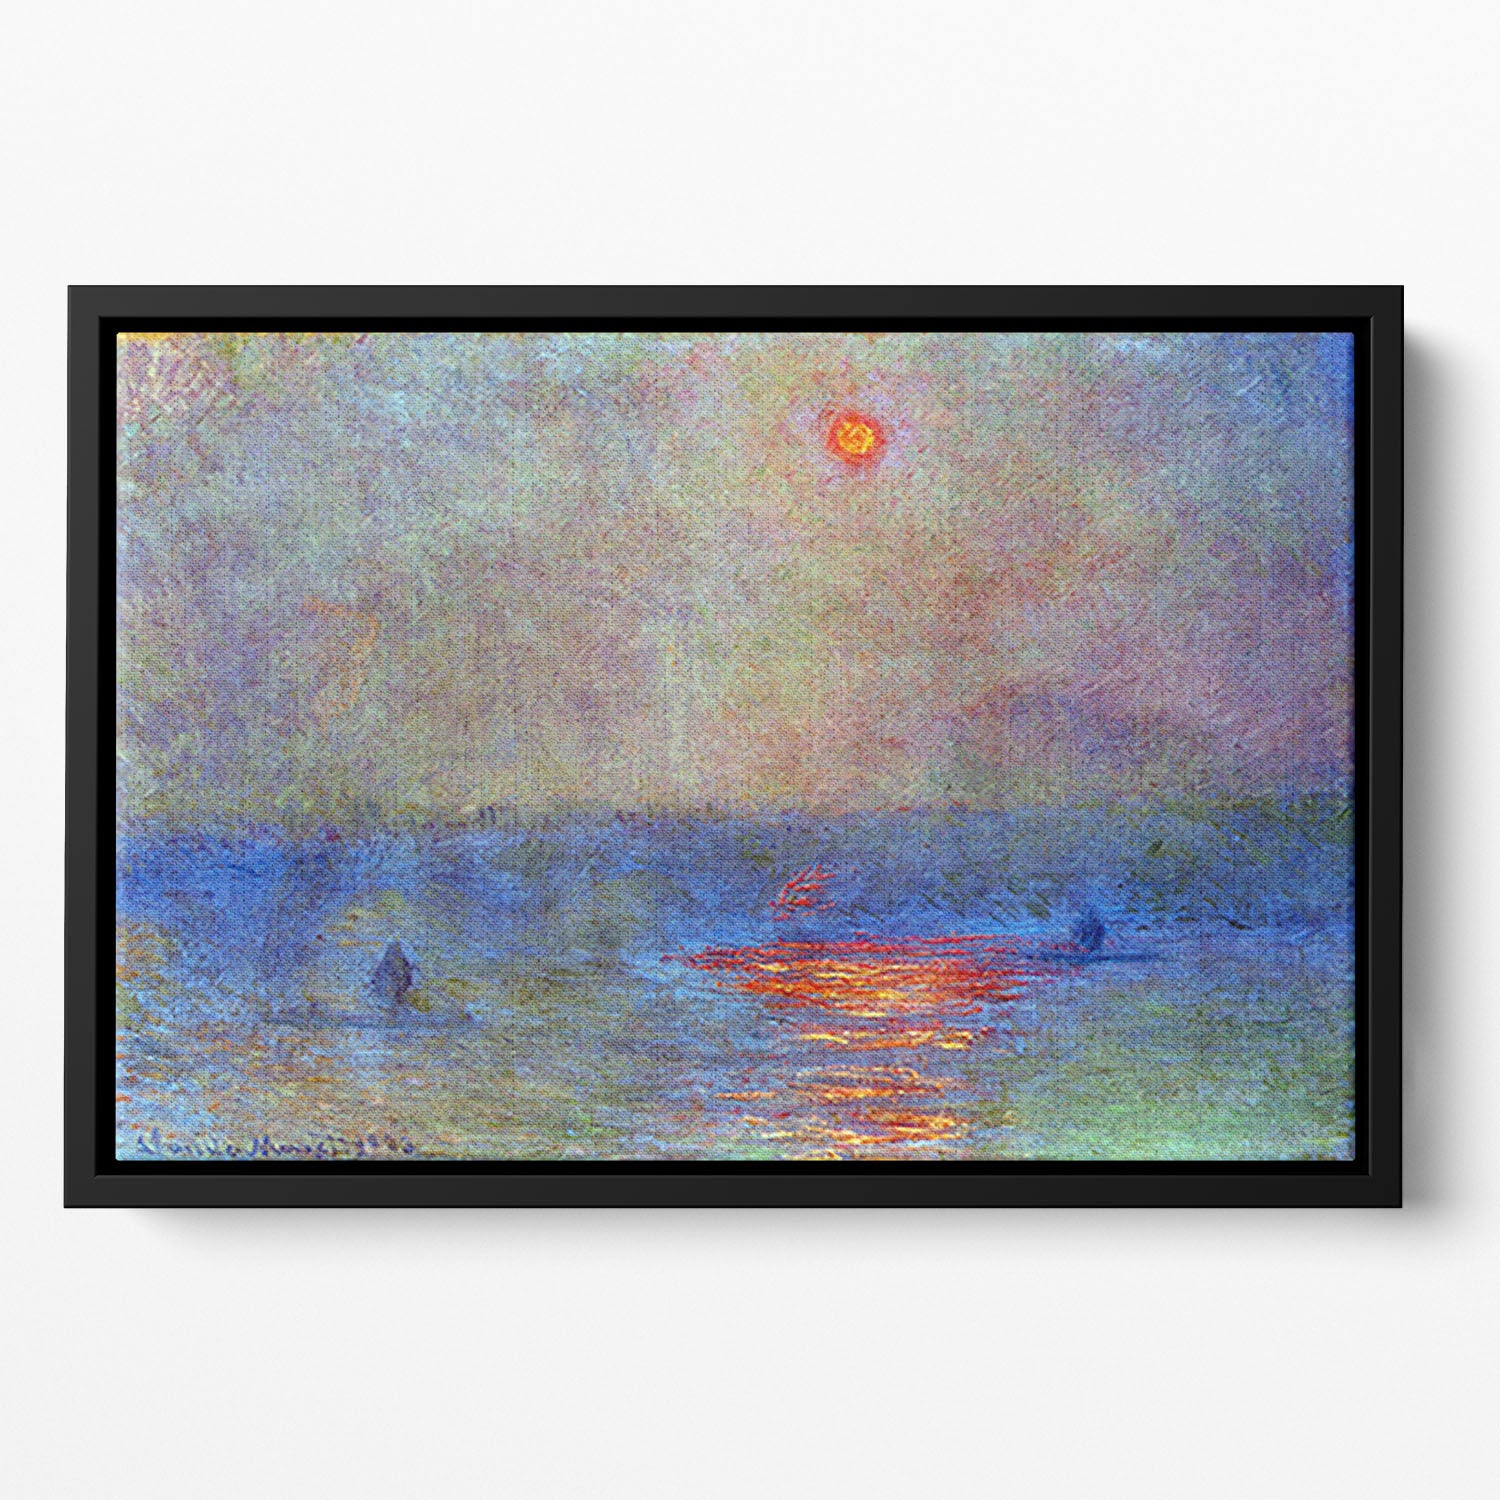 Waterloo Bridge the sun in the fog by Monet Floating Framed Canvas